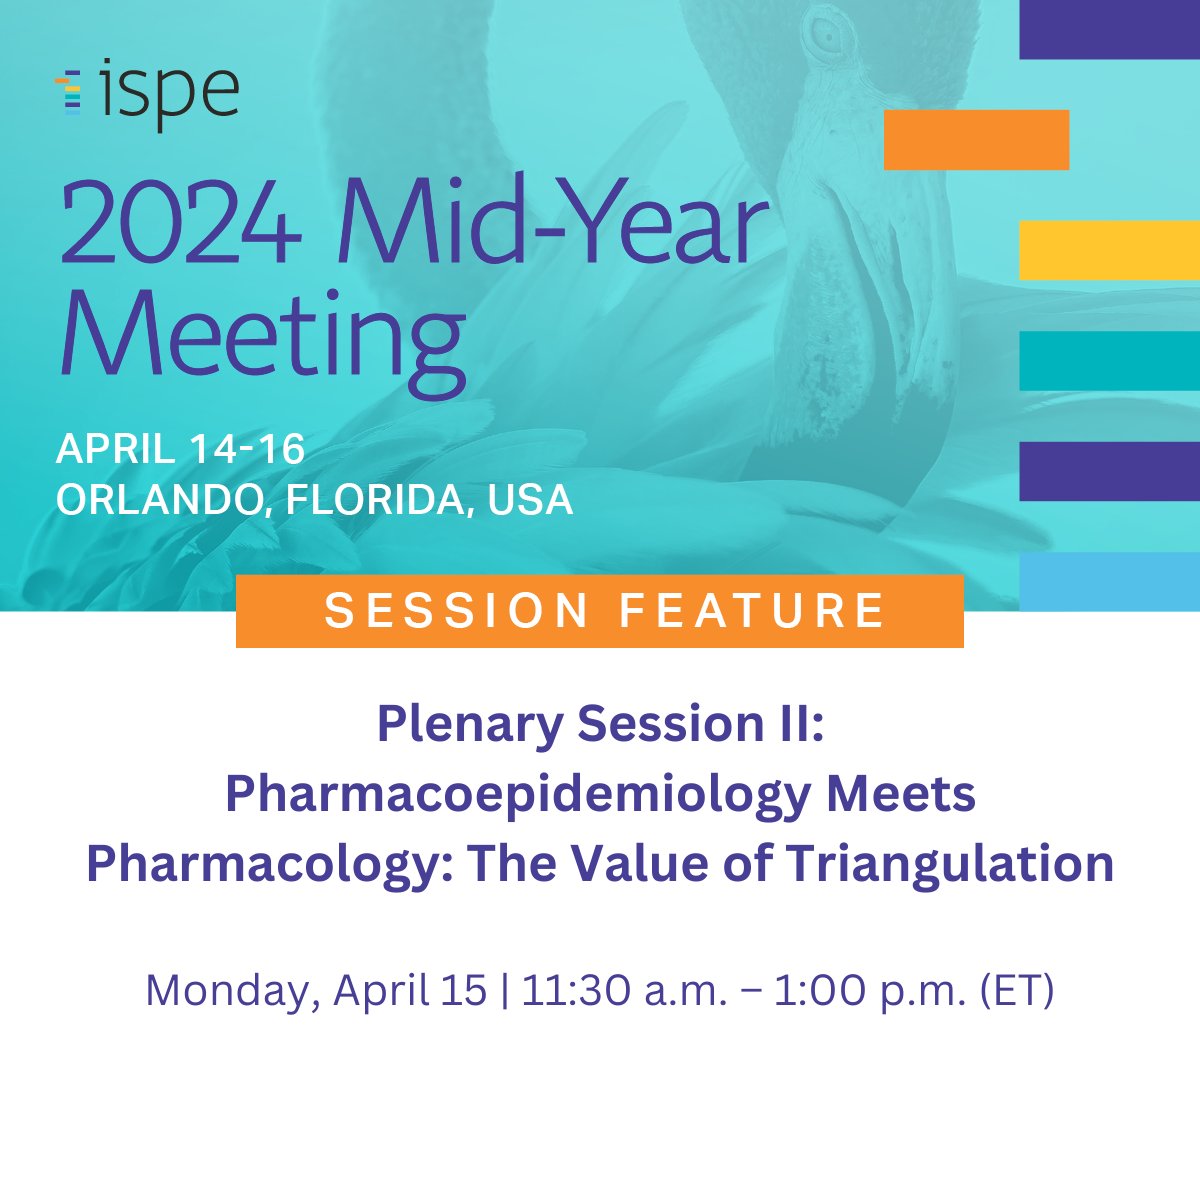 Explore benefits of incorporating #Pharmacoepidemiology and pharmacology disciplines in research during our 2024 Mid-Year Meeting in Orlando, April 14-16! Join us as we share insights shaping evidence-based health care: bit.ly/3URdrph #PharmEpi #EpiTwitter #ISPEMY2024